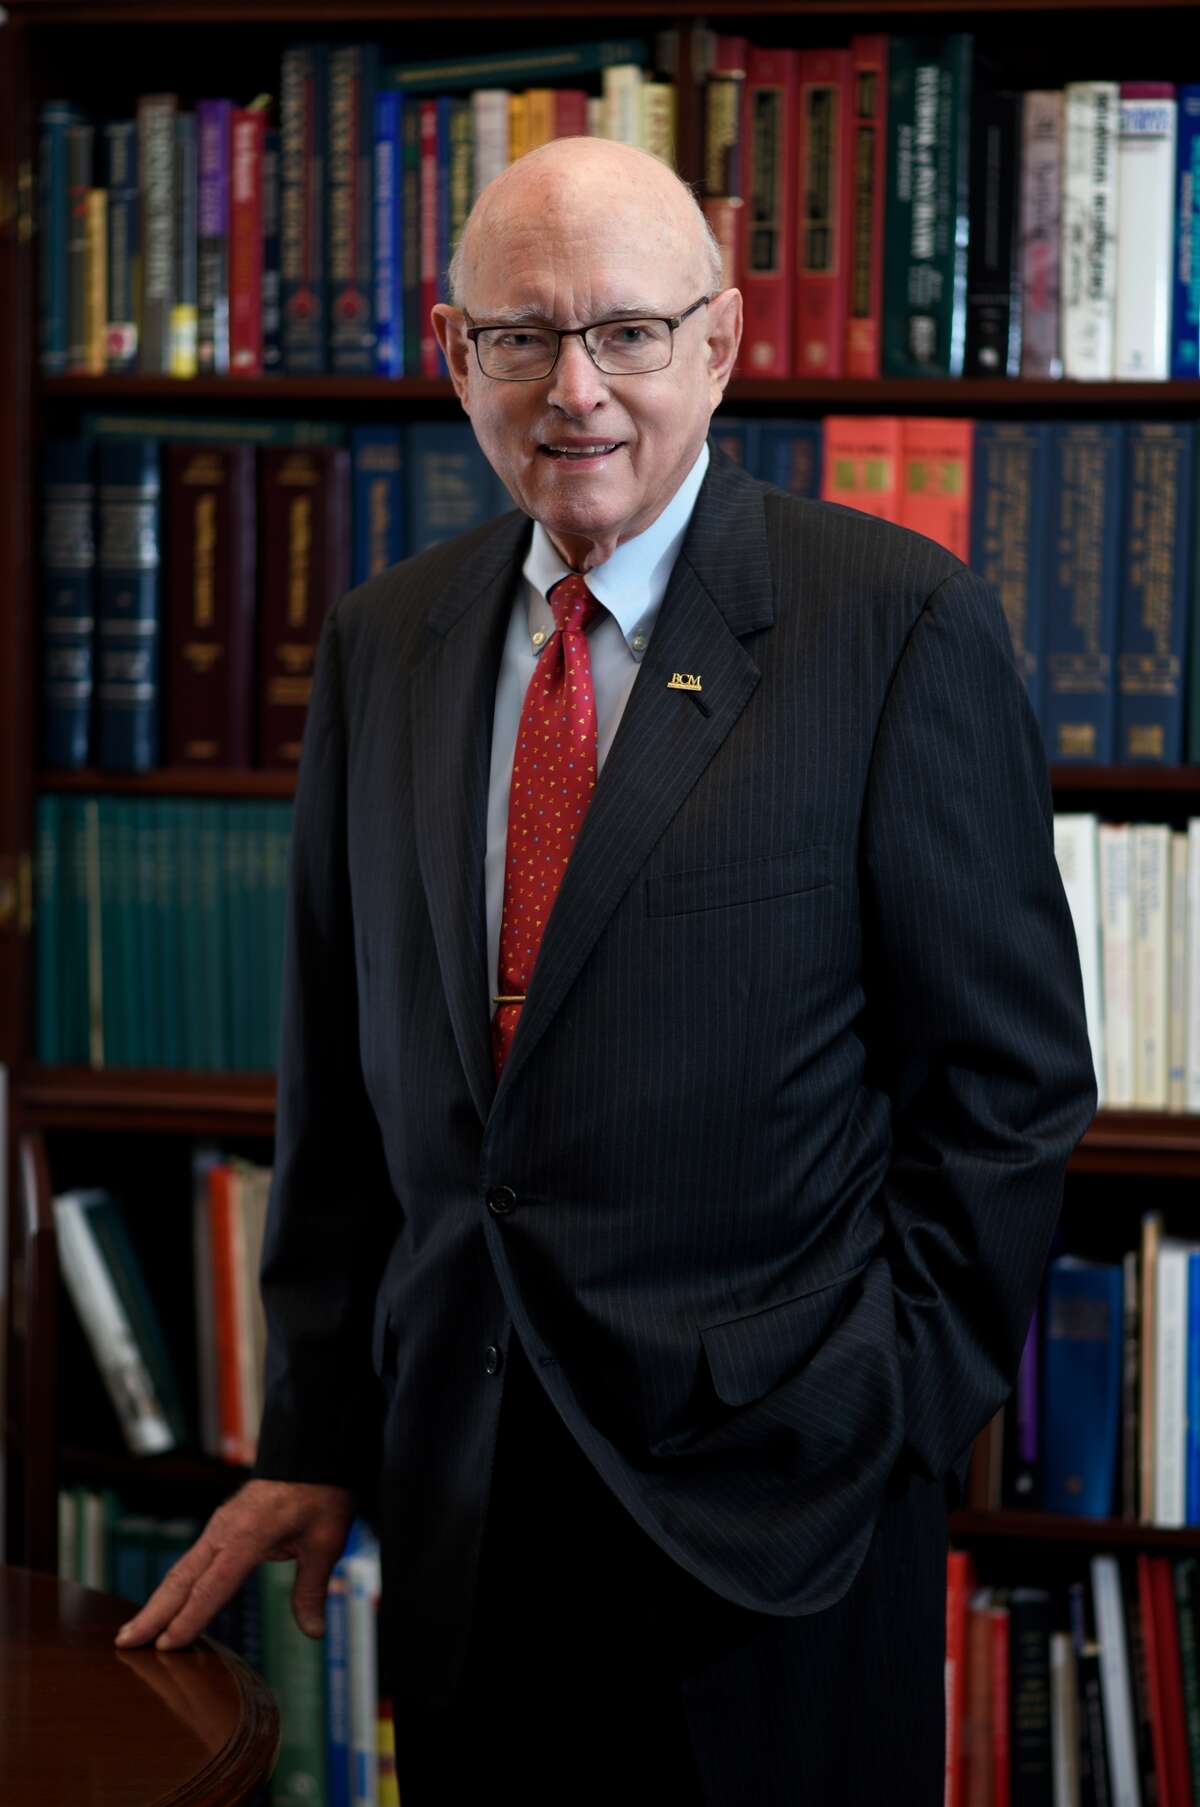 Dr. William Butler, president of Baylor College of Medicine from 1979 to 1996, died Friday of pancreatic cancer.